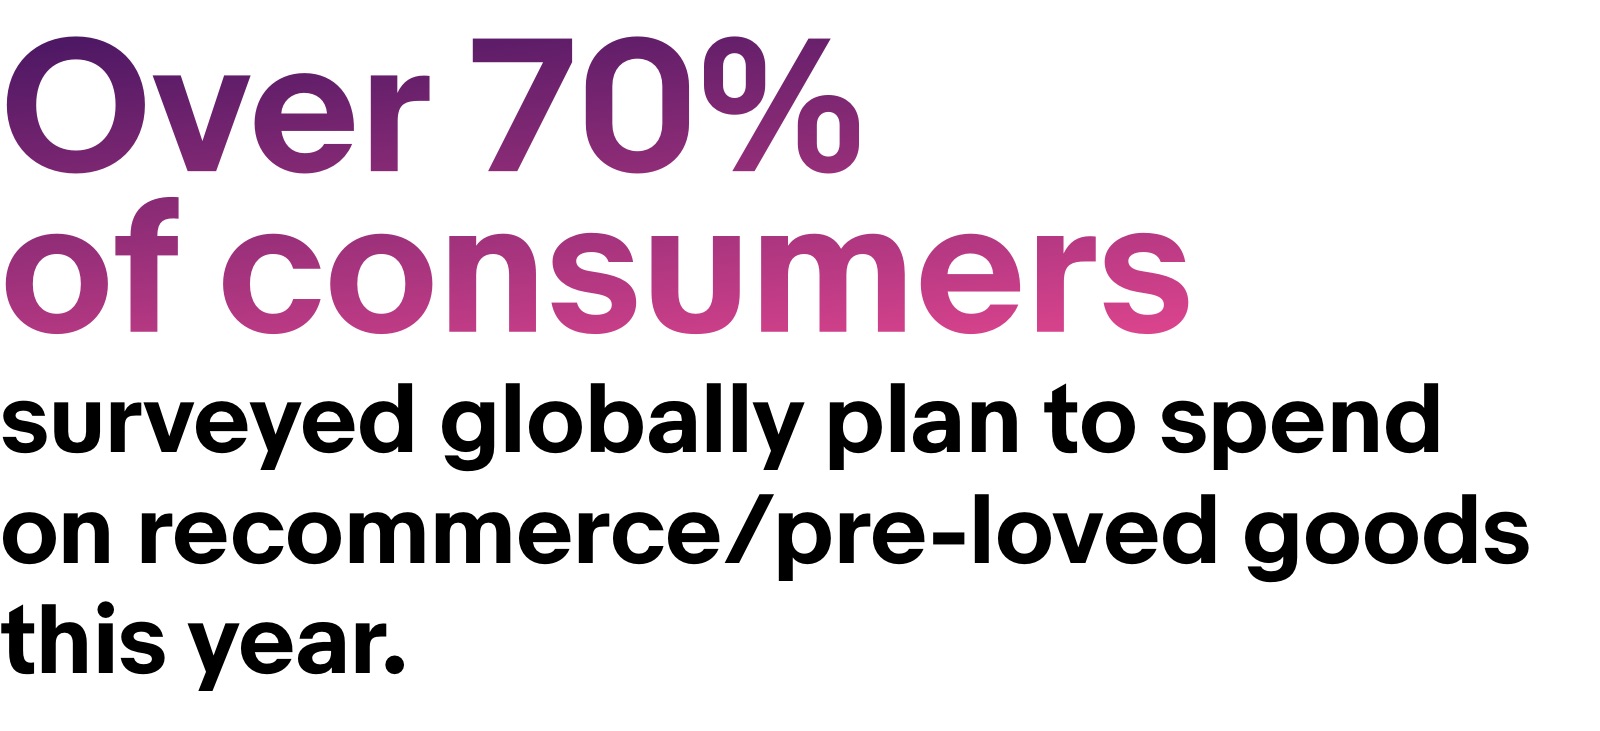 Over 70% of consumers surveyed globally plan to spend on recommerce/pre-loved goods this year.